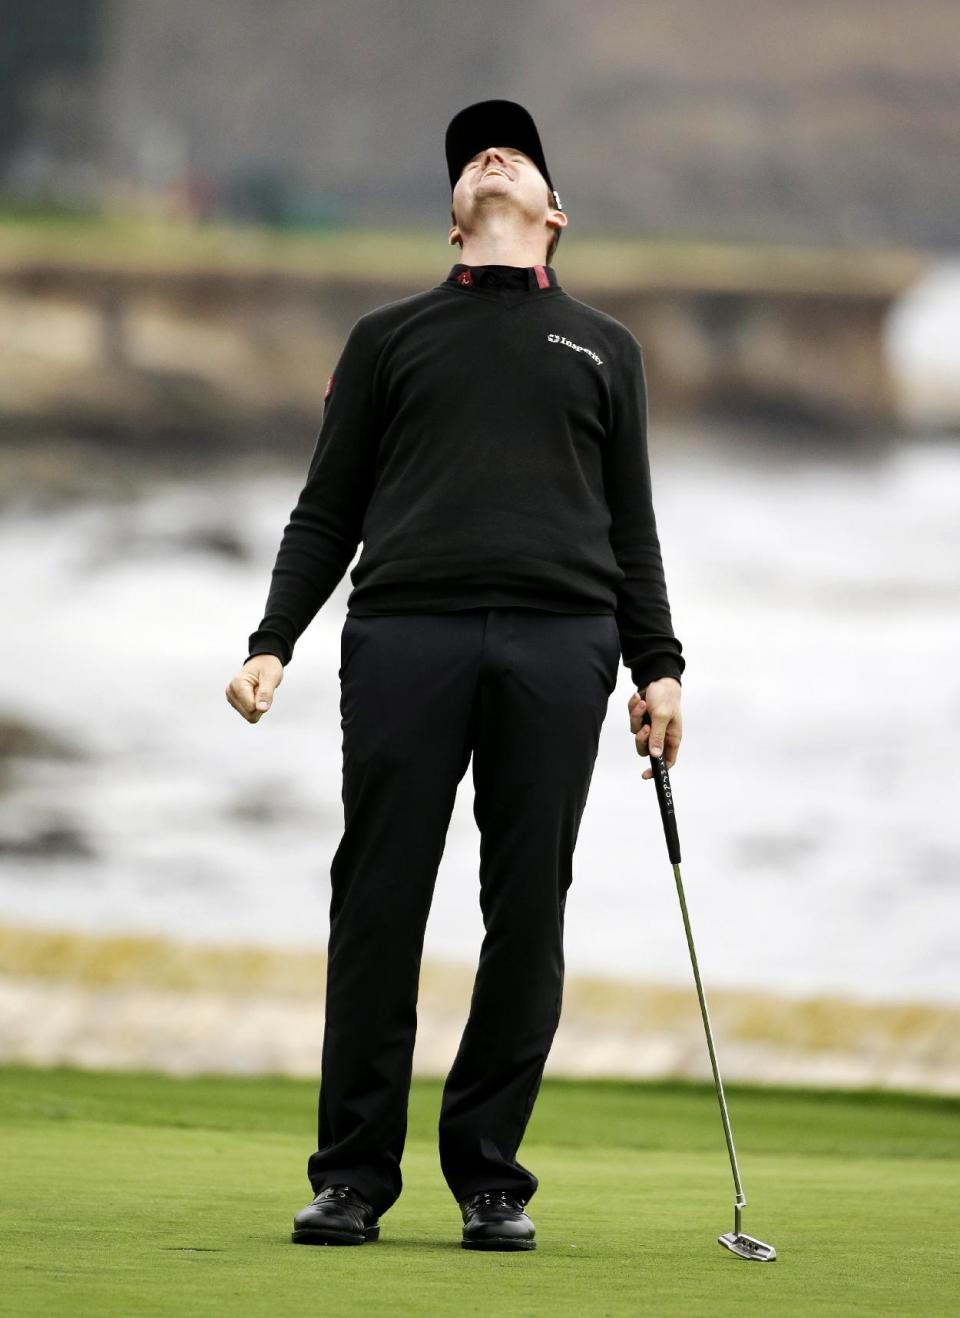 Jimmy Walker celebrates on the 18th green Sunday, Feb. 9, 2014, after winning the AT&T Pebble Beach Pro-Am golf tournament in Pebble Beach, Calif. (AP Photo/Eric Risberg)